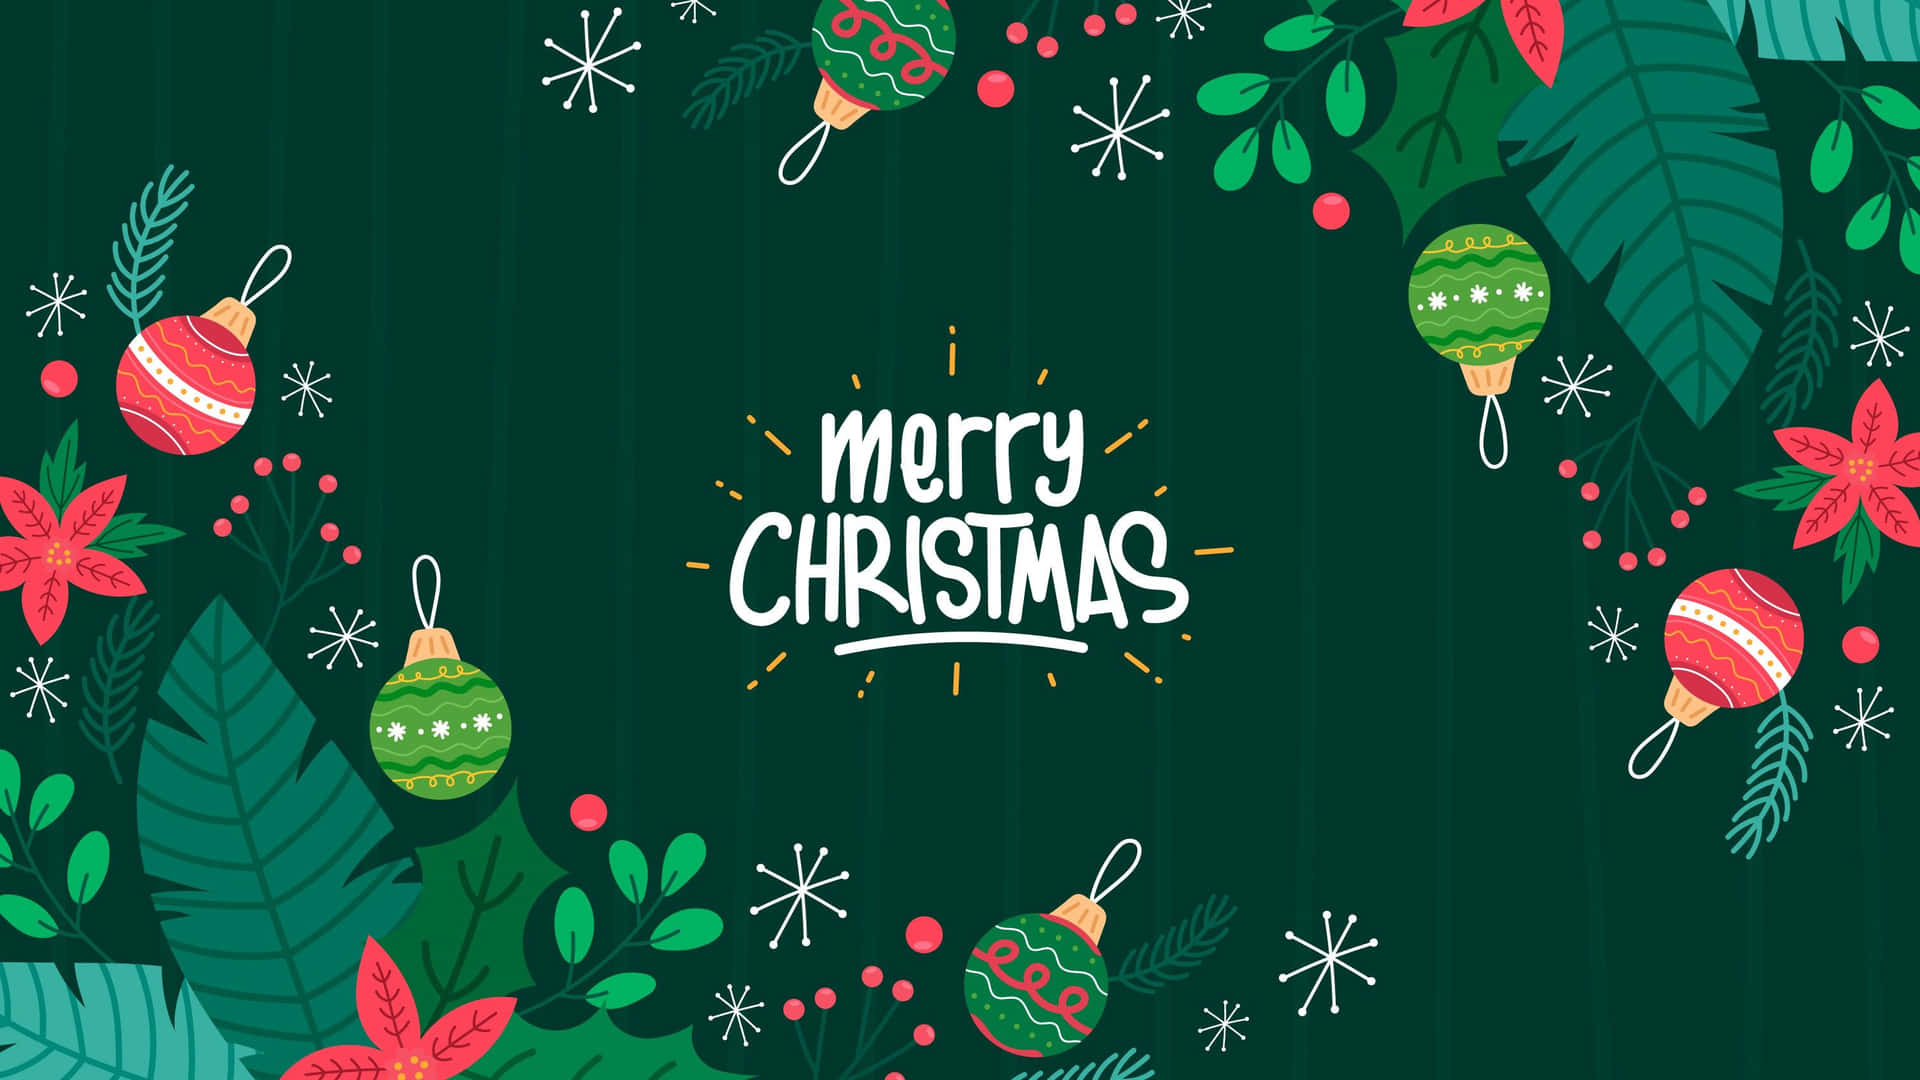 Download Green Merry Christmas Holiday Greeting Wallpaper | Wallpapers.com